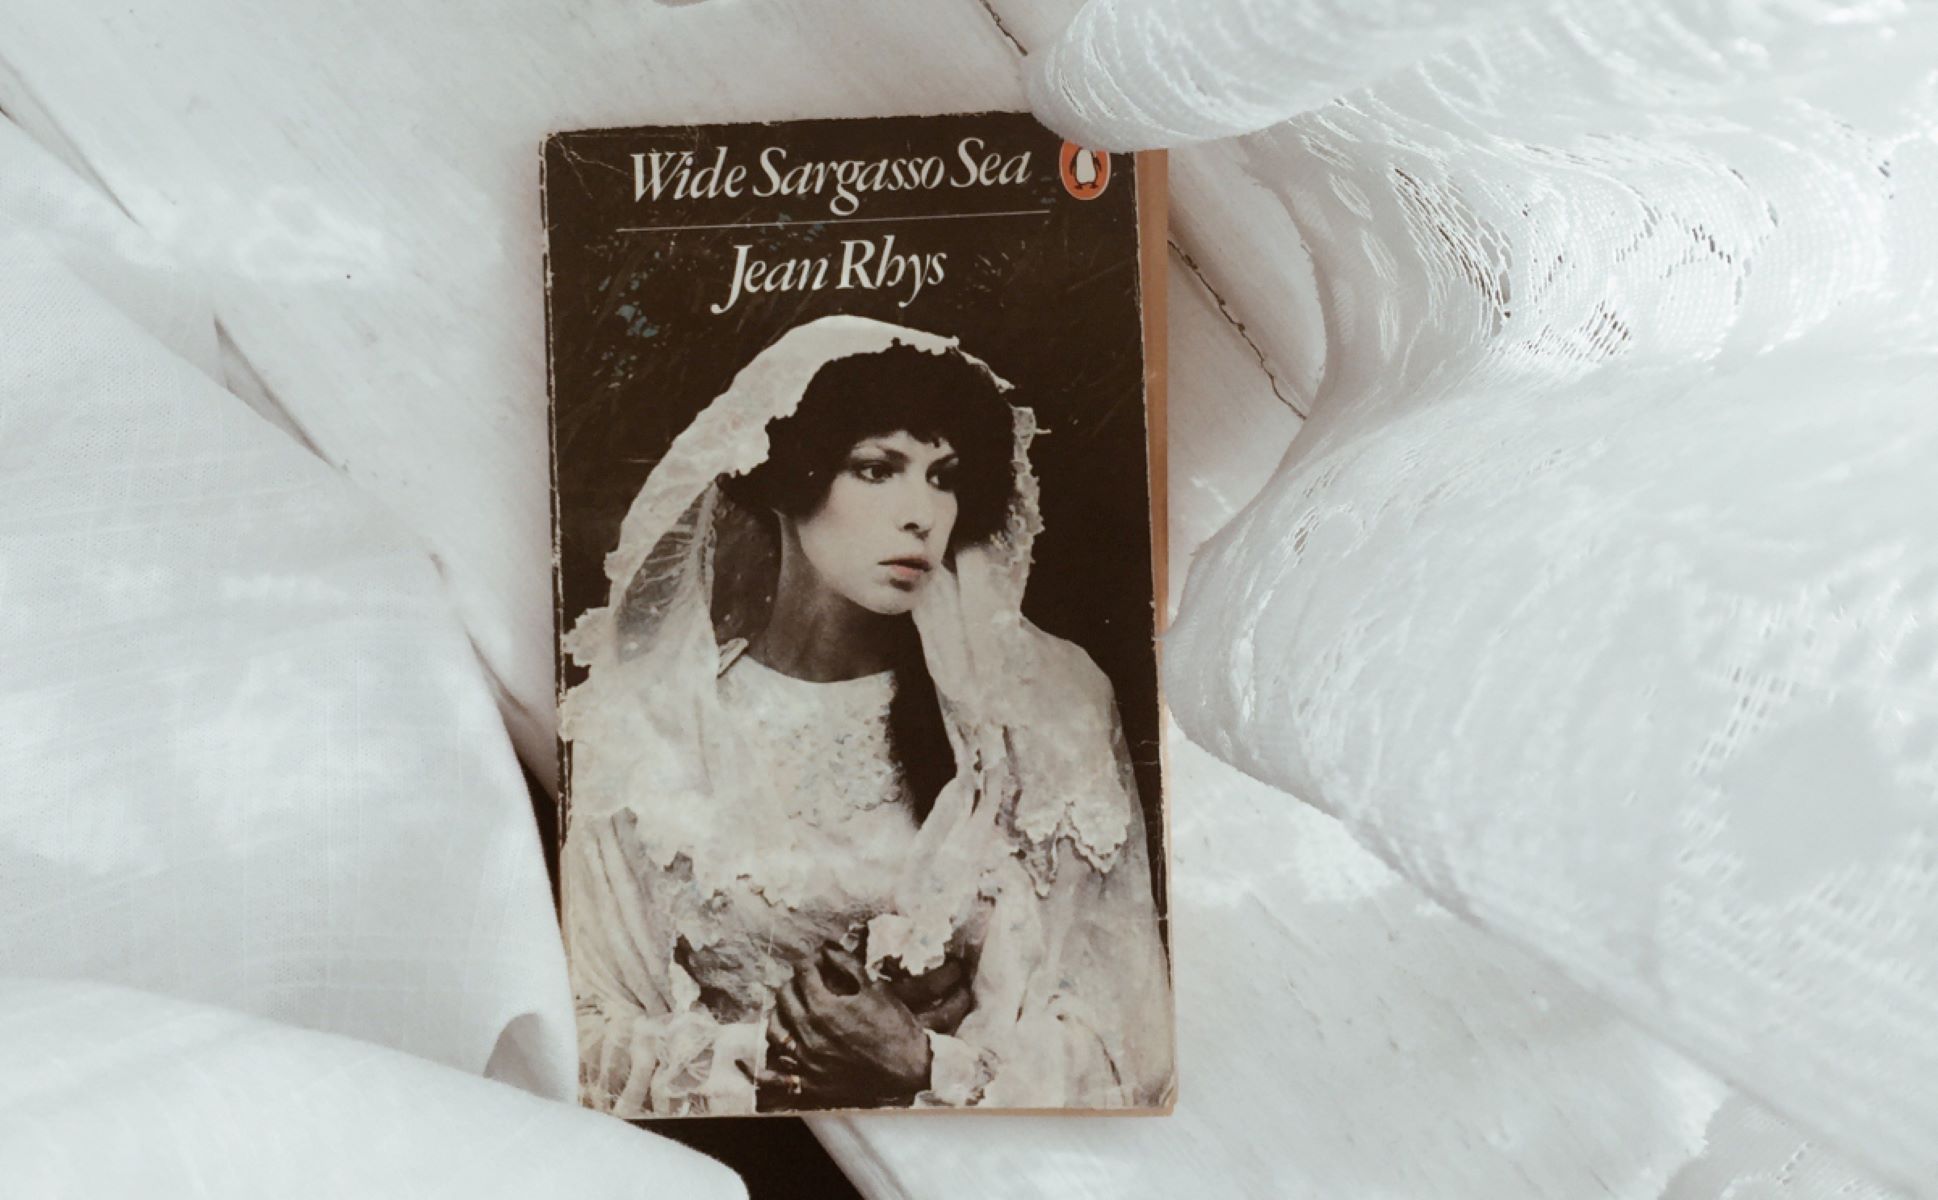 19-captivating-facts-about-wide-sargasso-sea-jean-rhys